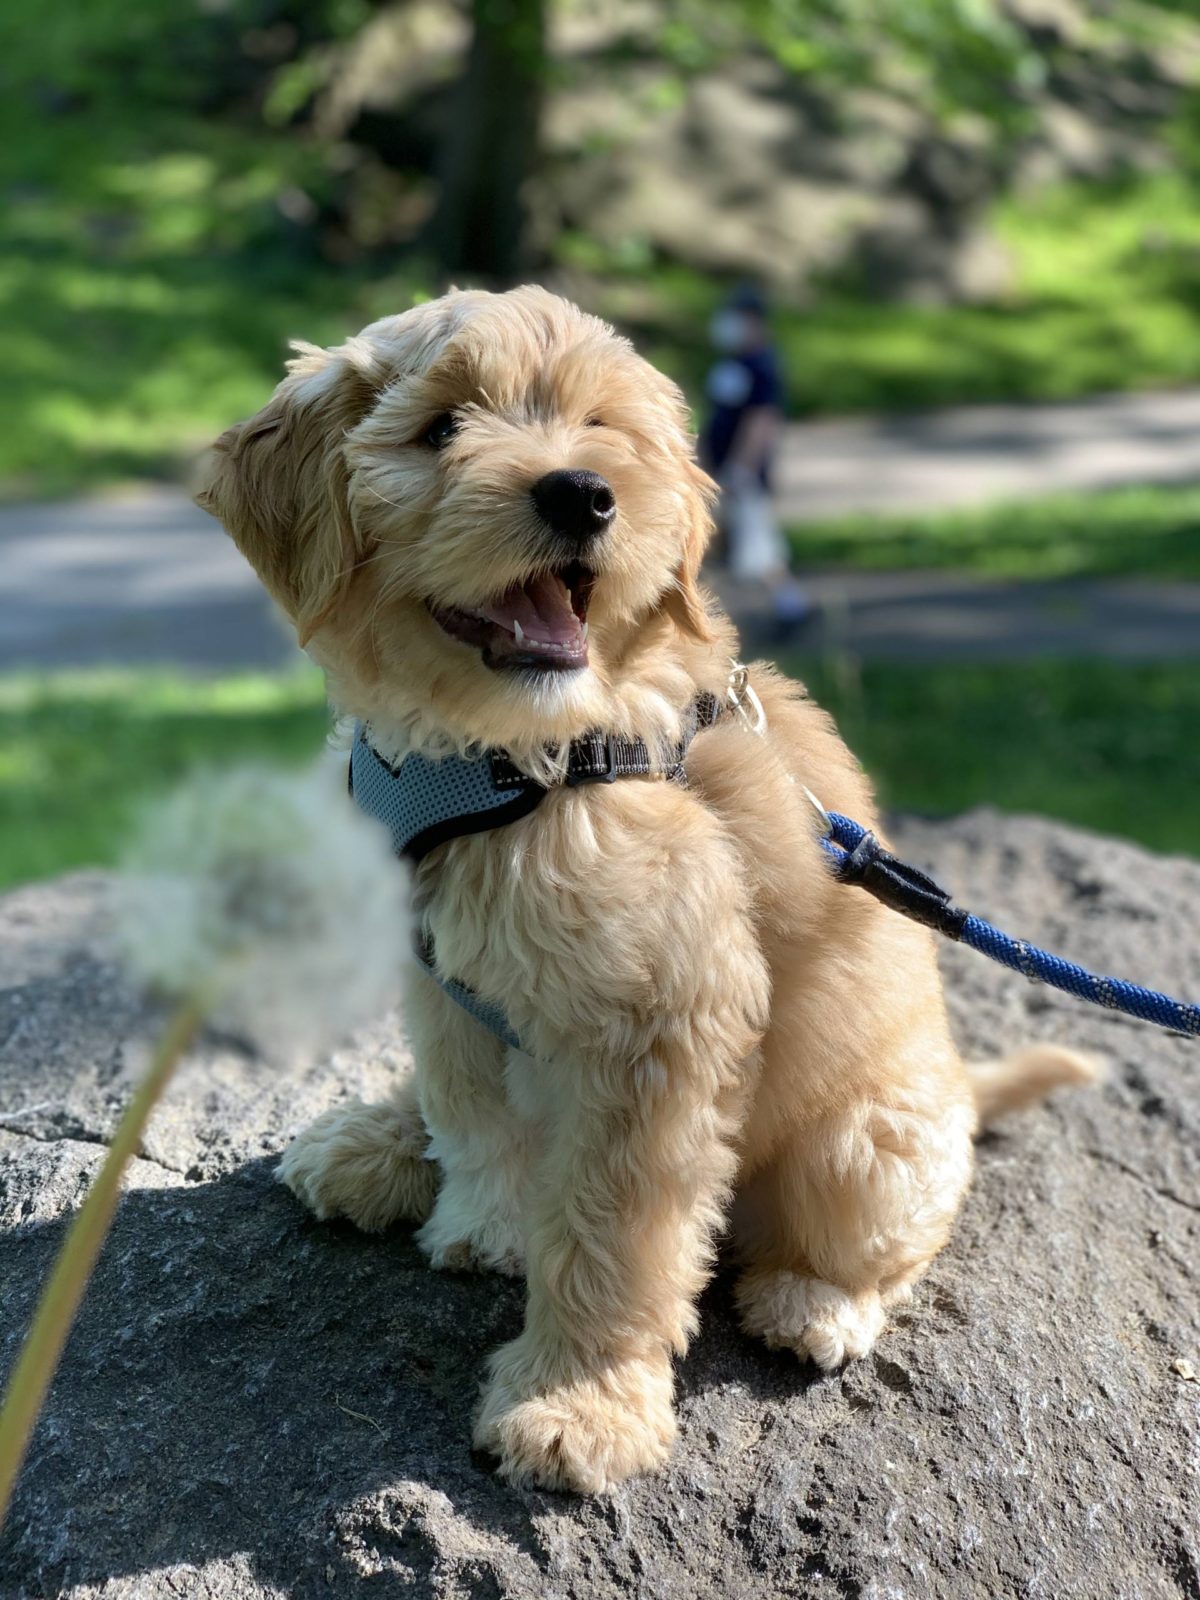 jasmine elias boswell and moose boswell, adorable golden doodle puppy, new york city central park